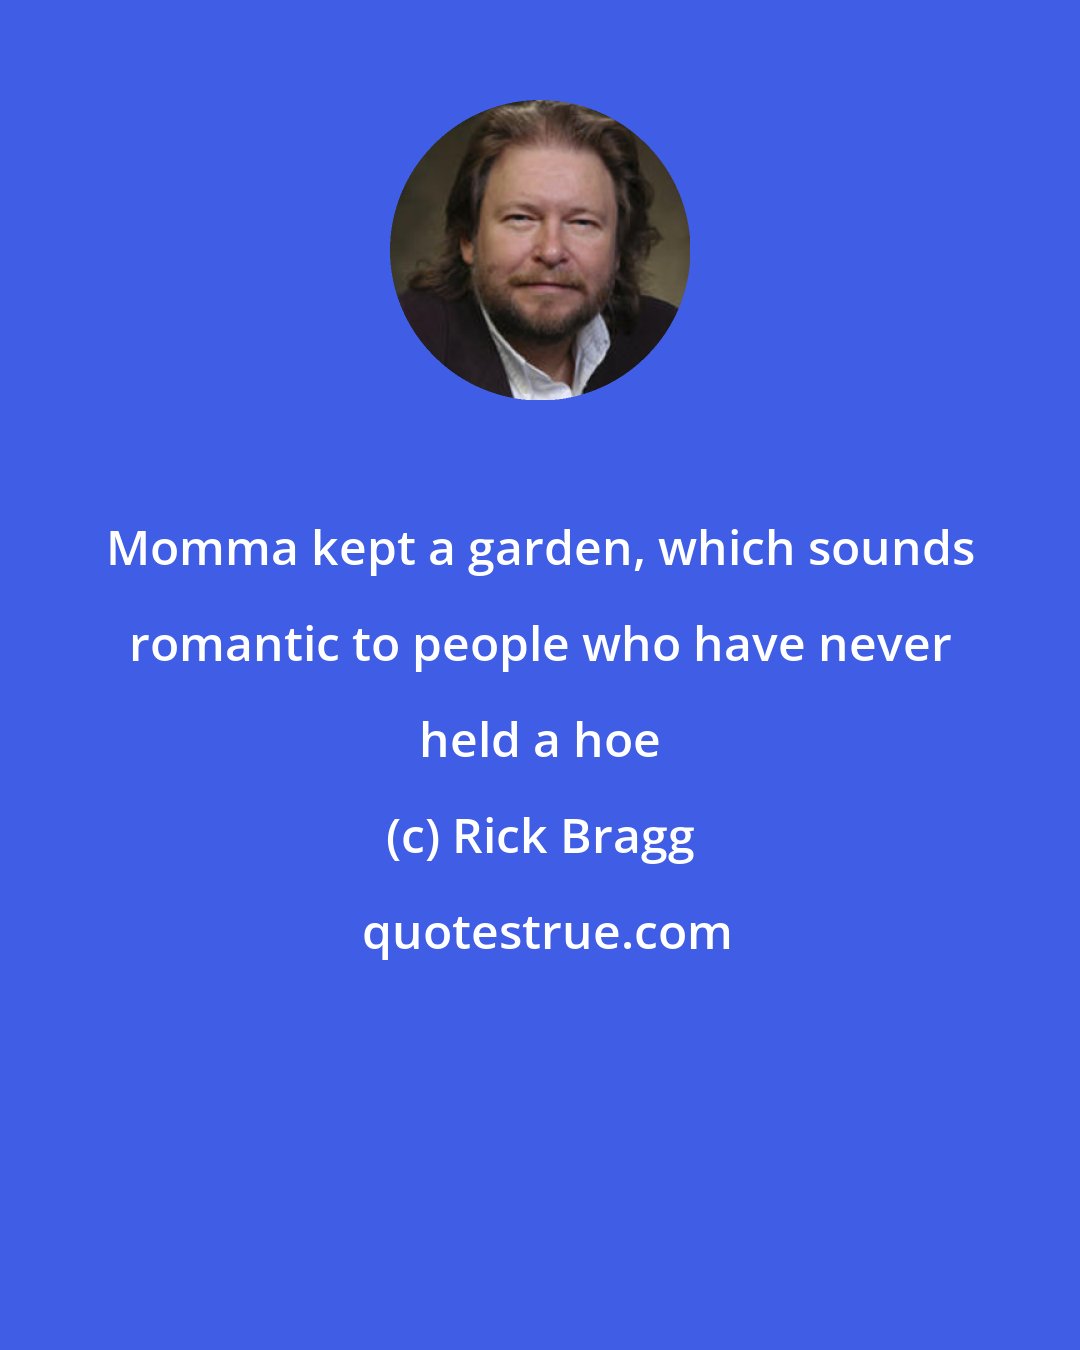 Rick Bragg: Momma kept a garden, which sounds romantic to people who have never held a hoe